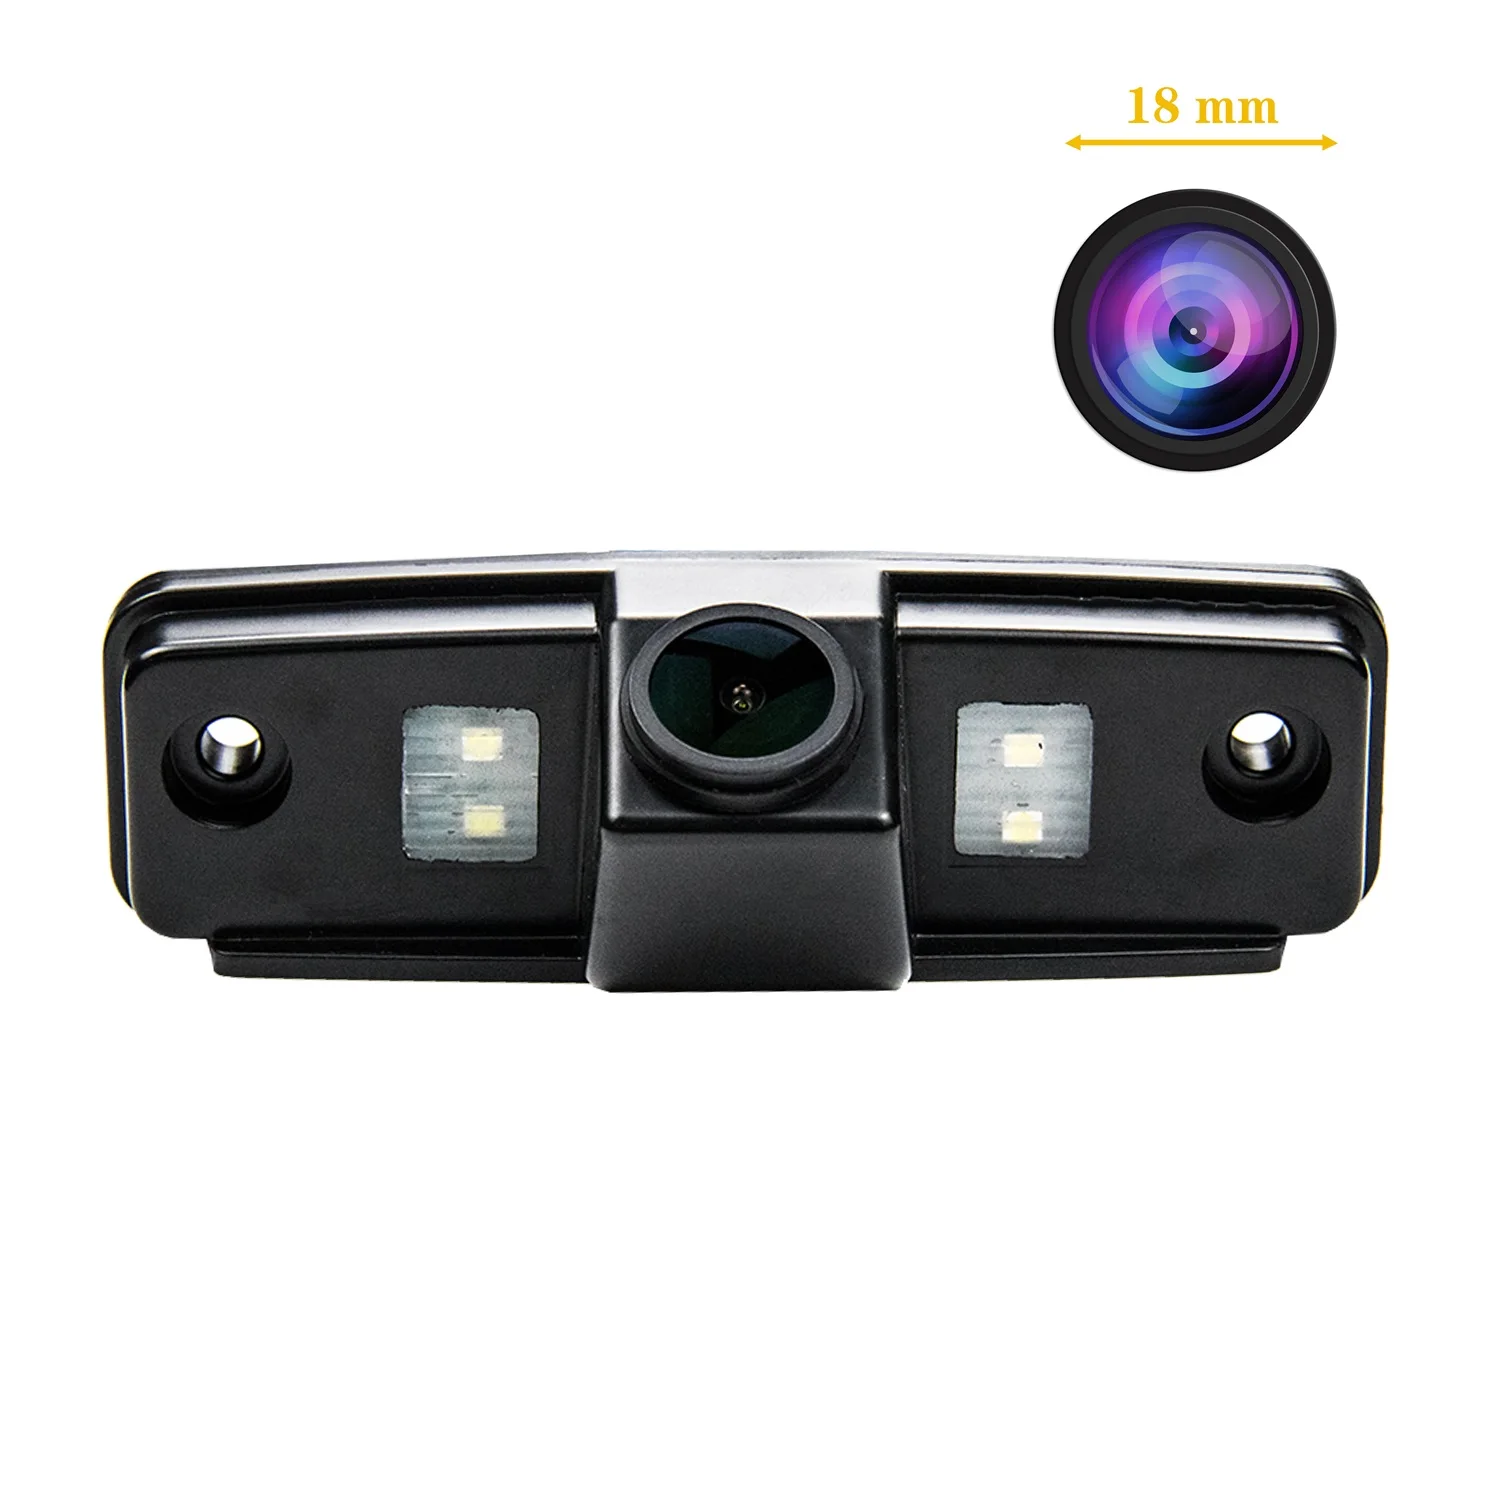 

Misayaee HD 1280x720P Rear View Camera Plate Light for Subaru Forester Dodge Charger Outback Wagon Impreza Sedan 5-speed WRX